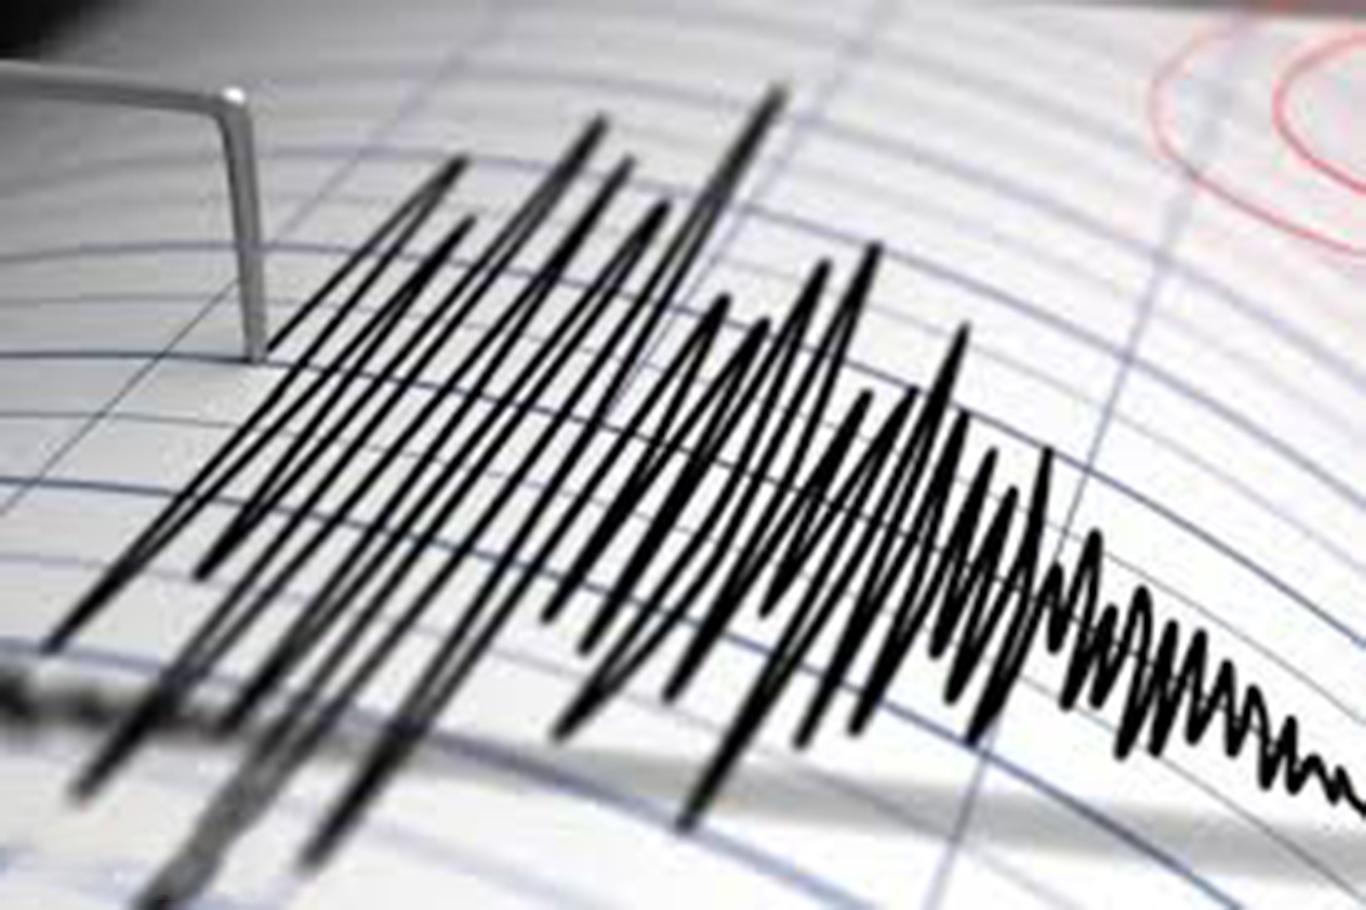 6.8-magnitude earthquake hit Southern Philippines